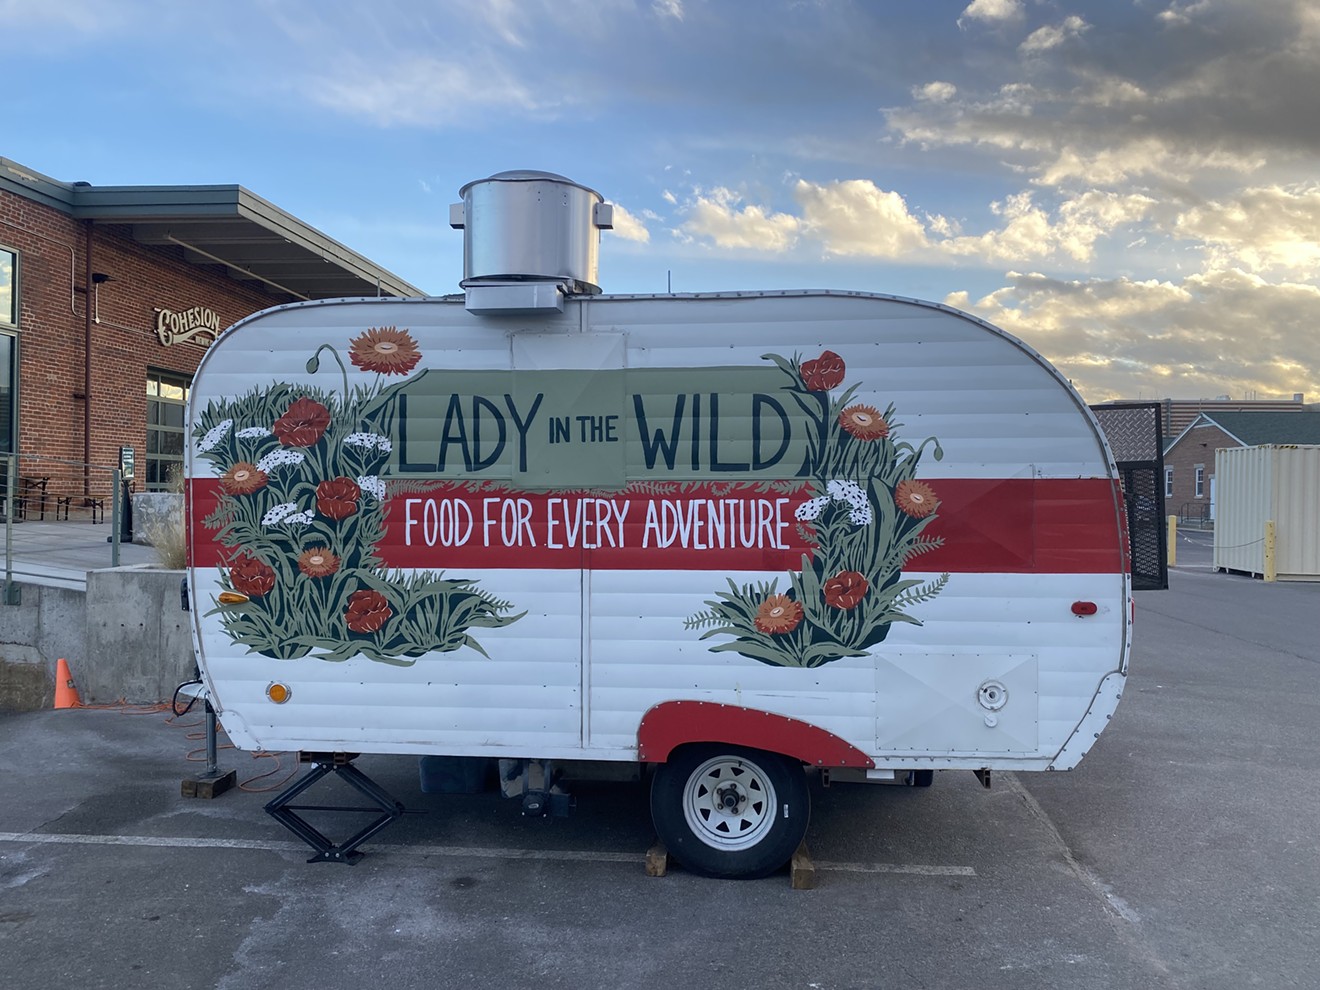 Look for the Lady in the Wild food truck.